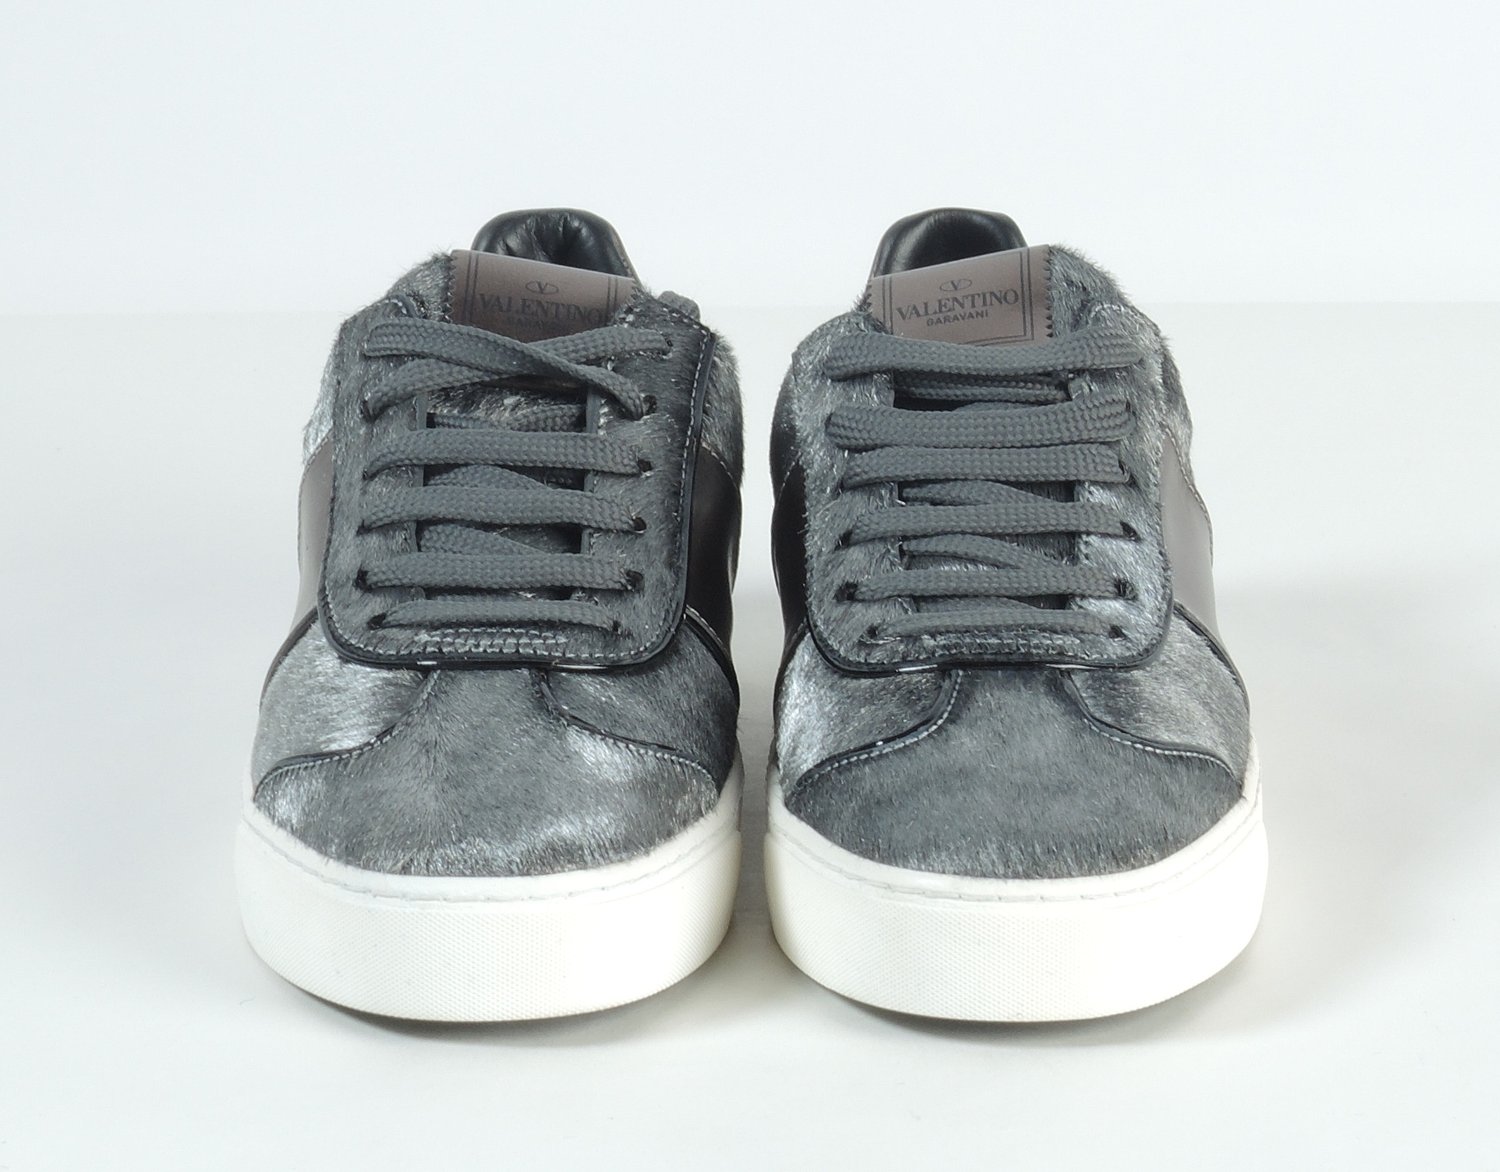 vente Ubrugelig influenza VALENTINO Silver Dyed Fur and Leather Rock Studded Low Top Sneakers (39) —  Seams to Fit Women's Consignment